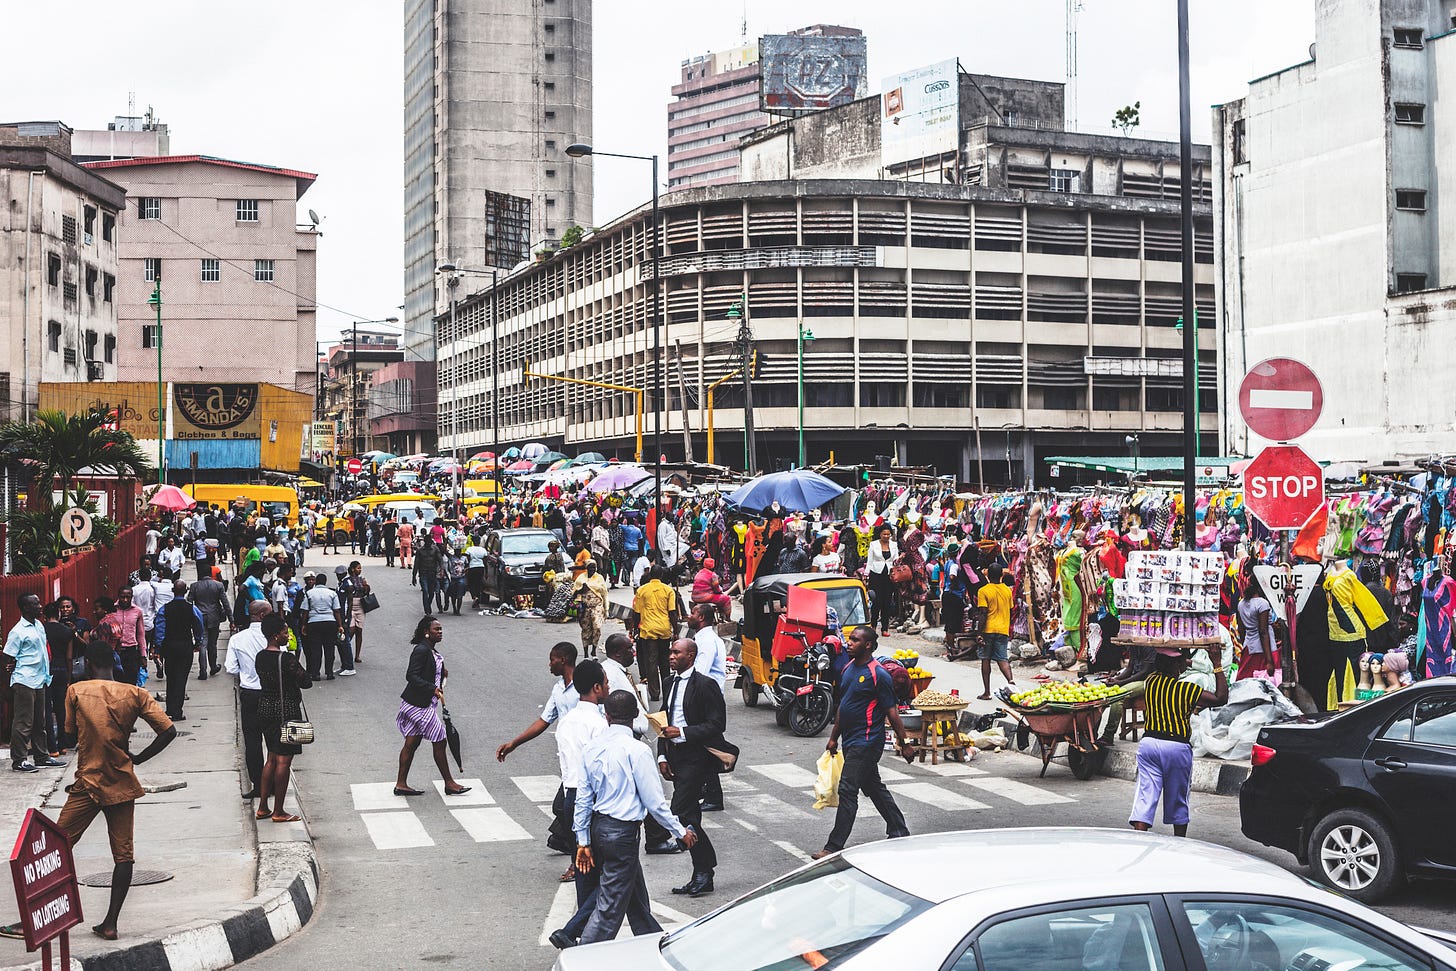 Busy downtown Lagos streets with pedestrians and shopping stalls